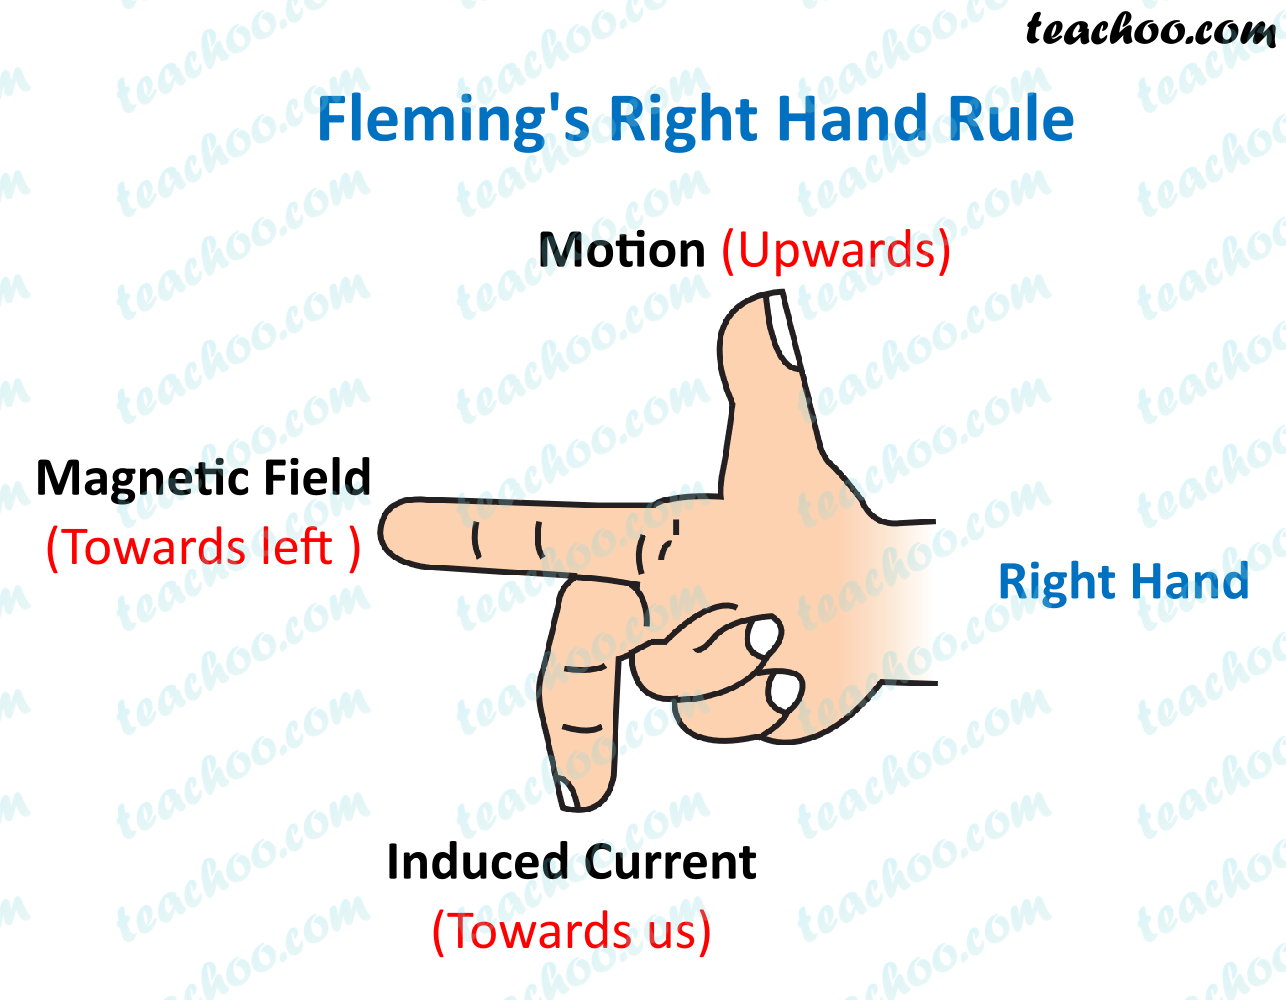 Fleming's Right Hand Rule - Explained in Different cases - Teachoo